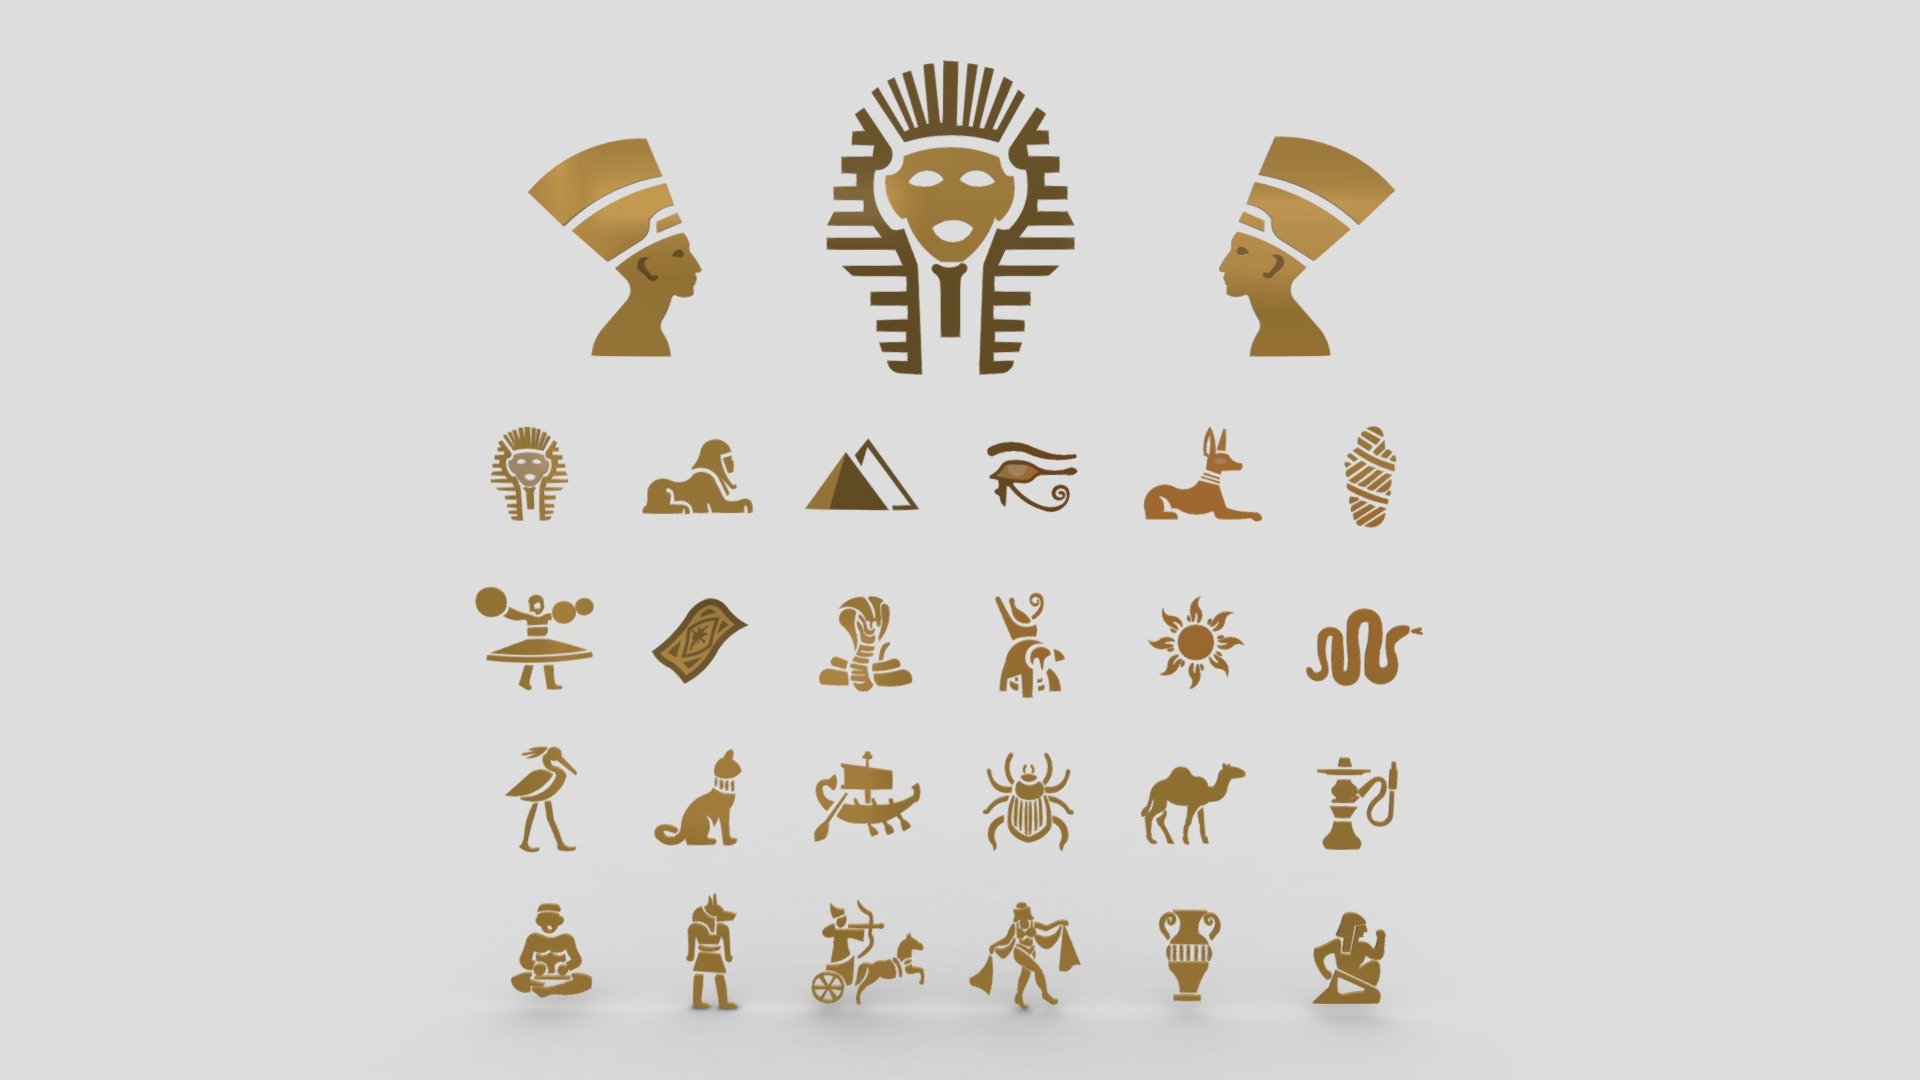 Egyptian Symbols - 010

Native Format File: 3Ds Max 2020 - Rendering by Vray Next.

3Ds Max Save as 3Ds Max 2017 with Converted all objects to Editable Poly.

3Ds Max Save as 3Ds Max 2020 ( Standard Materials ) with Converted all objects to Editable Poly.

Blender format file is available.

Exporting Formats: Autodesk FBX ( .fbx ), OBJ ( obj, mtl ), usdz, glb, gltf, 3DS, DAE.

All 2D Drawings are available as AutoCAD ( DWG ).

Support 24/7 3d model